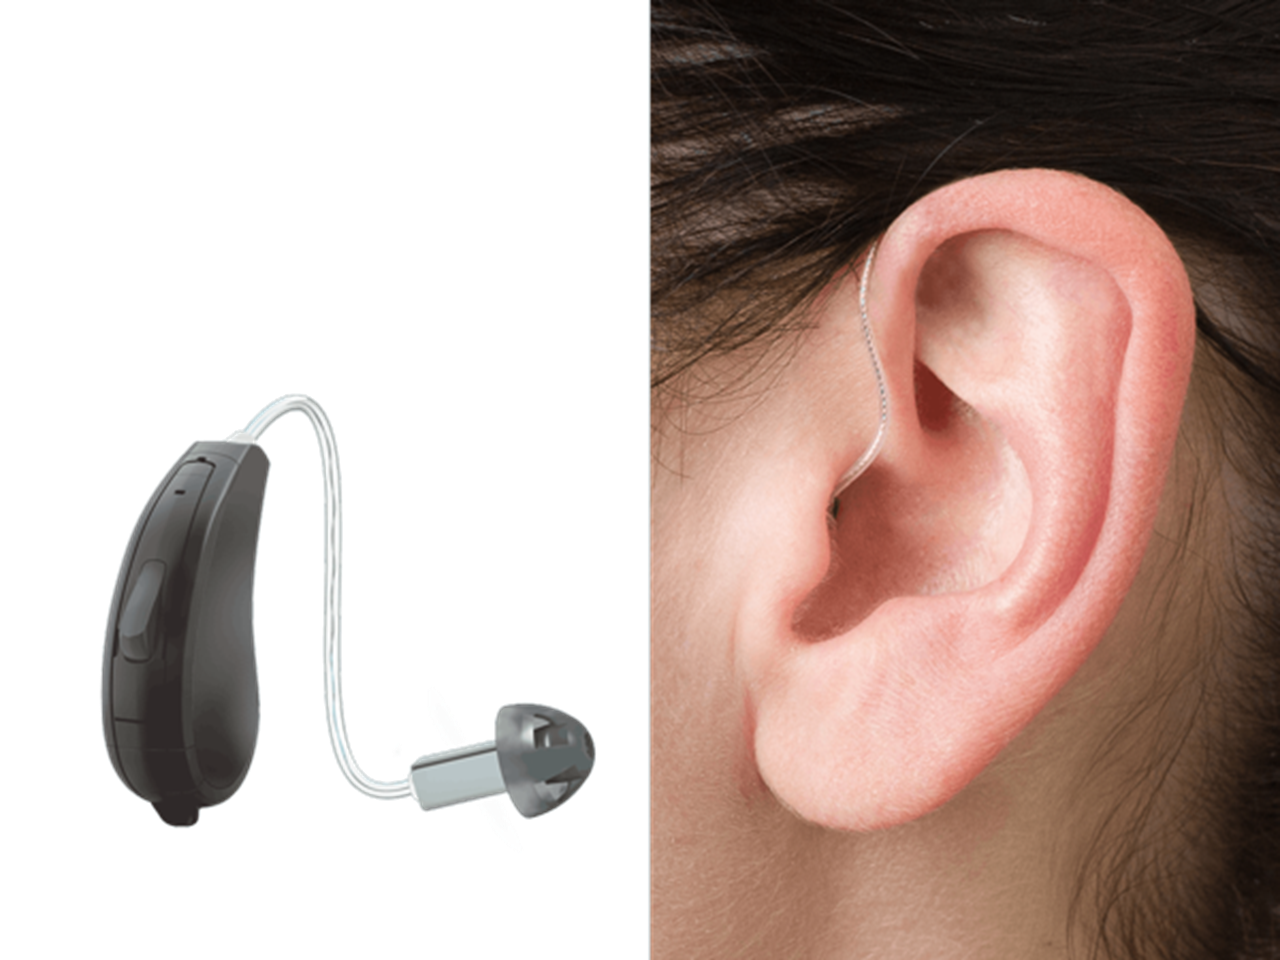 Is Beltone A Good Hearing Aid?